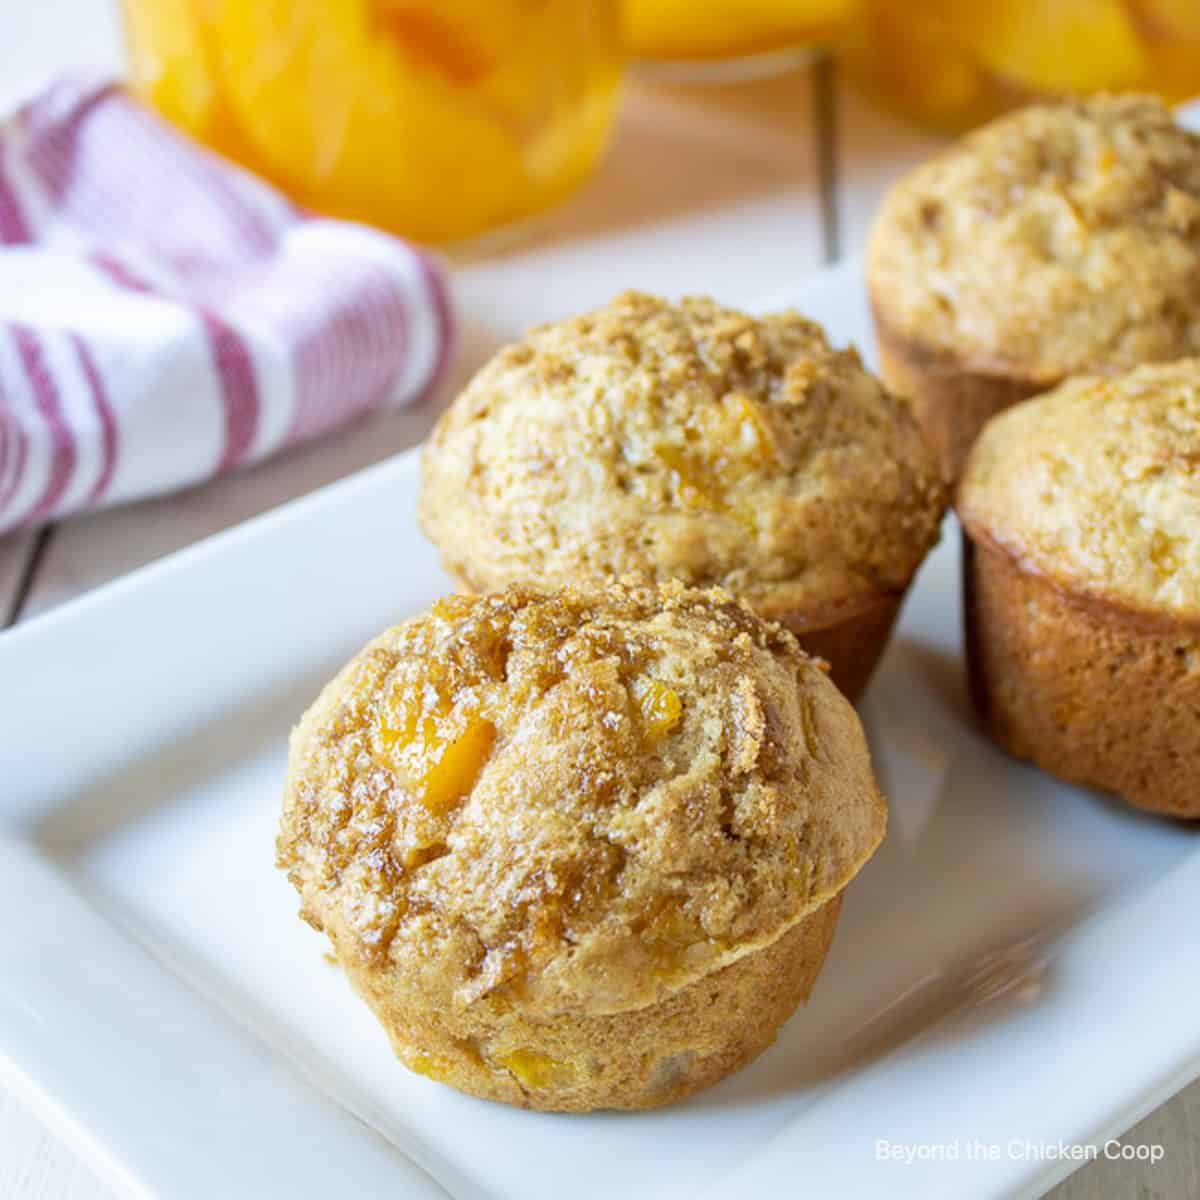 The Best Muffin Recipes - Beyond The Chicken Coop